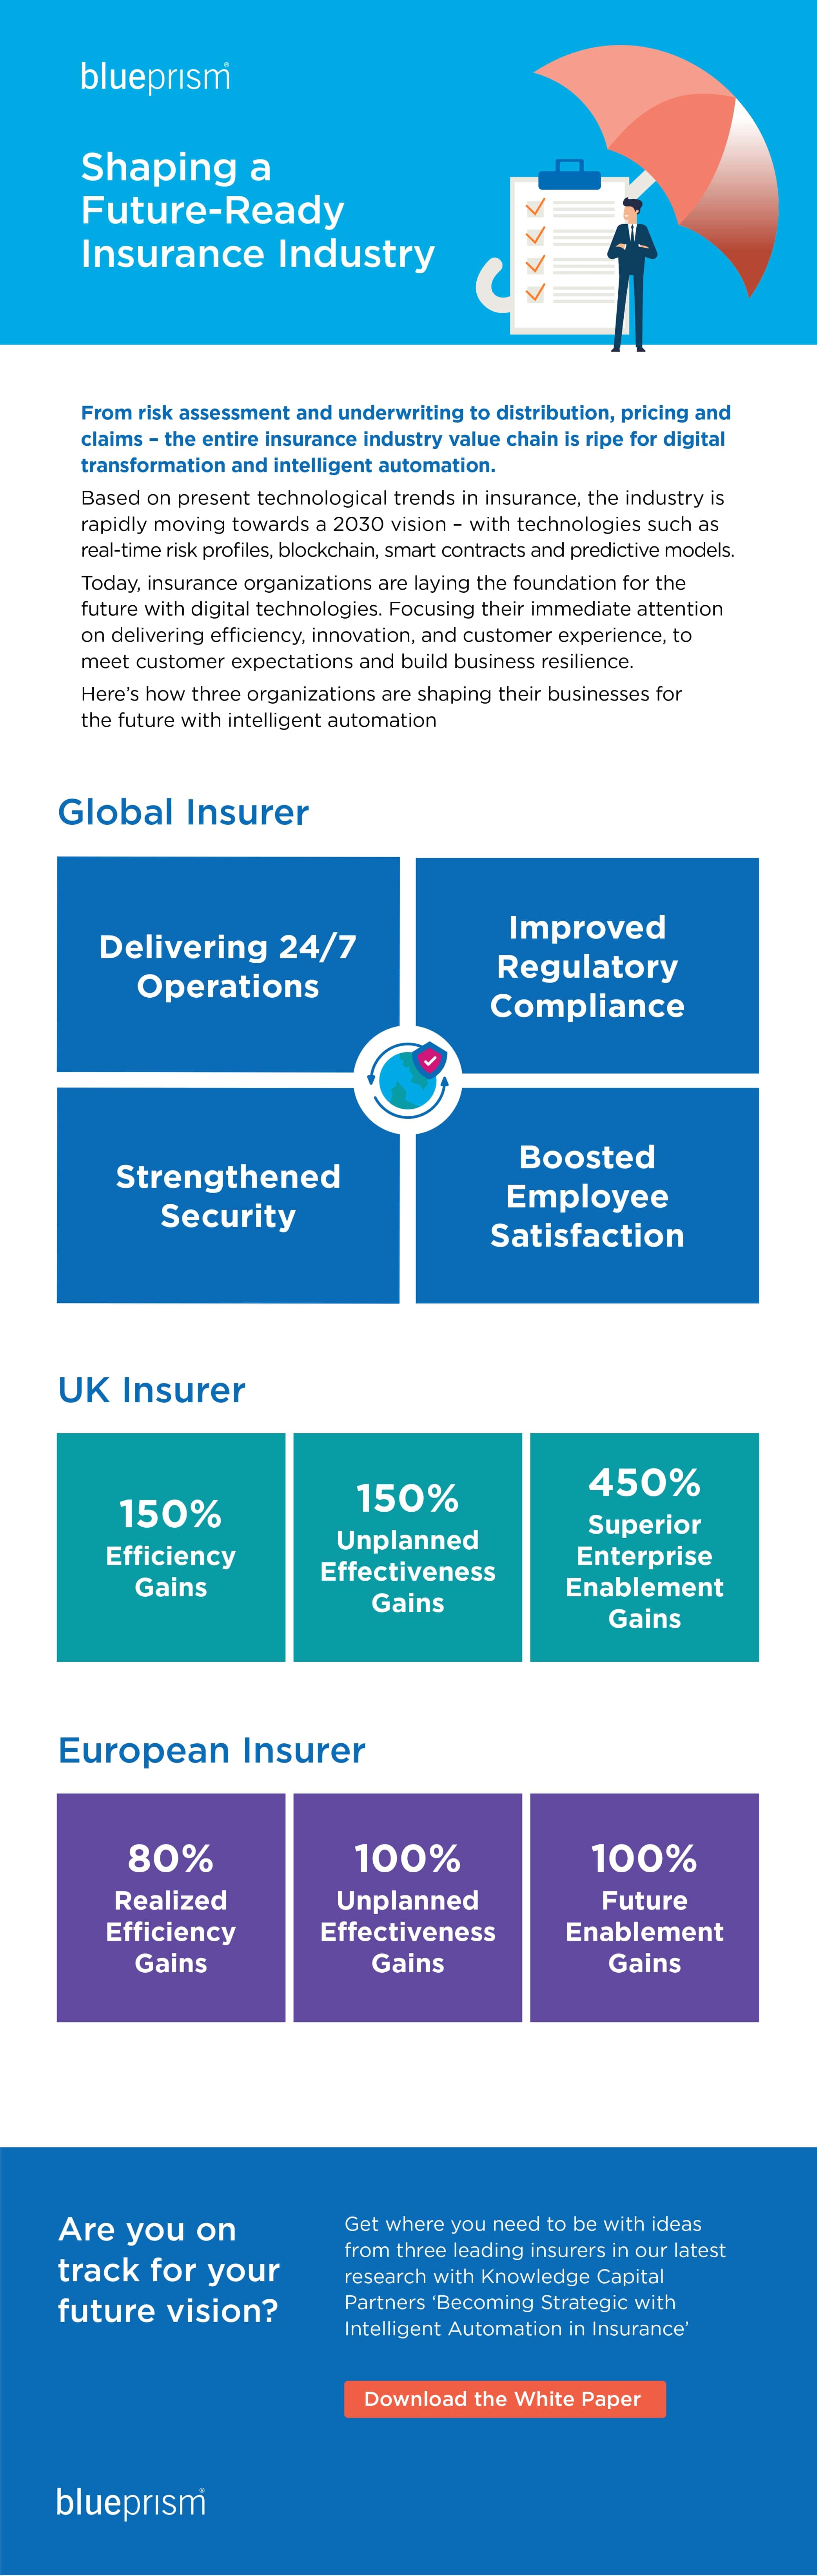 Shaping a Future-Ready Insurance Industry Infographic